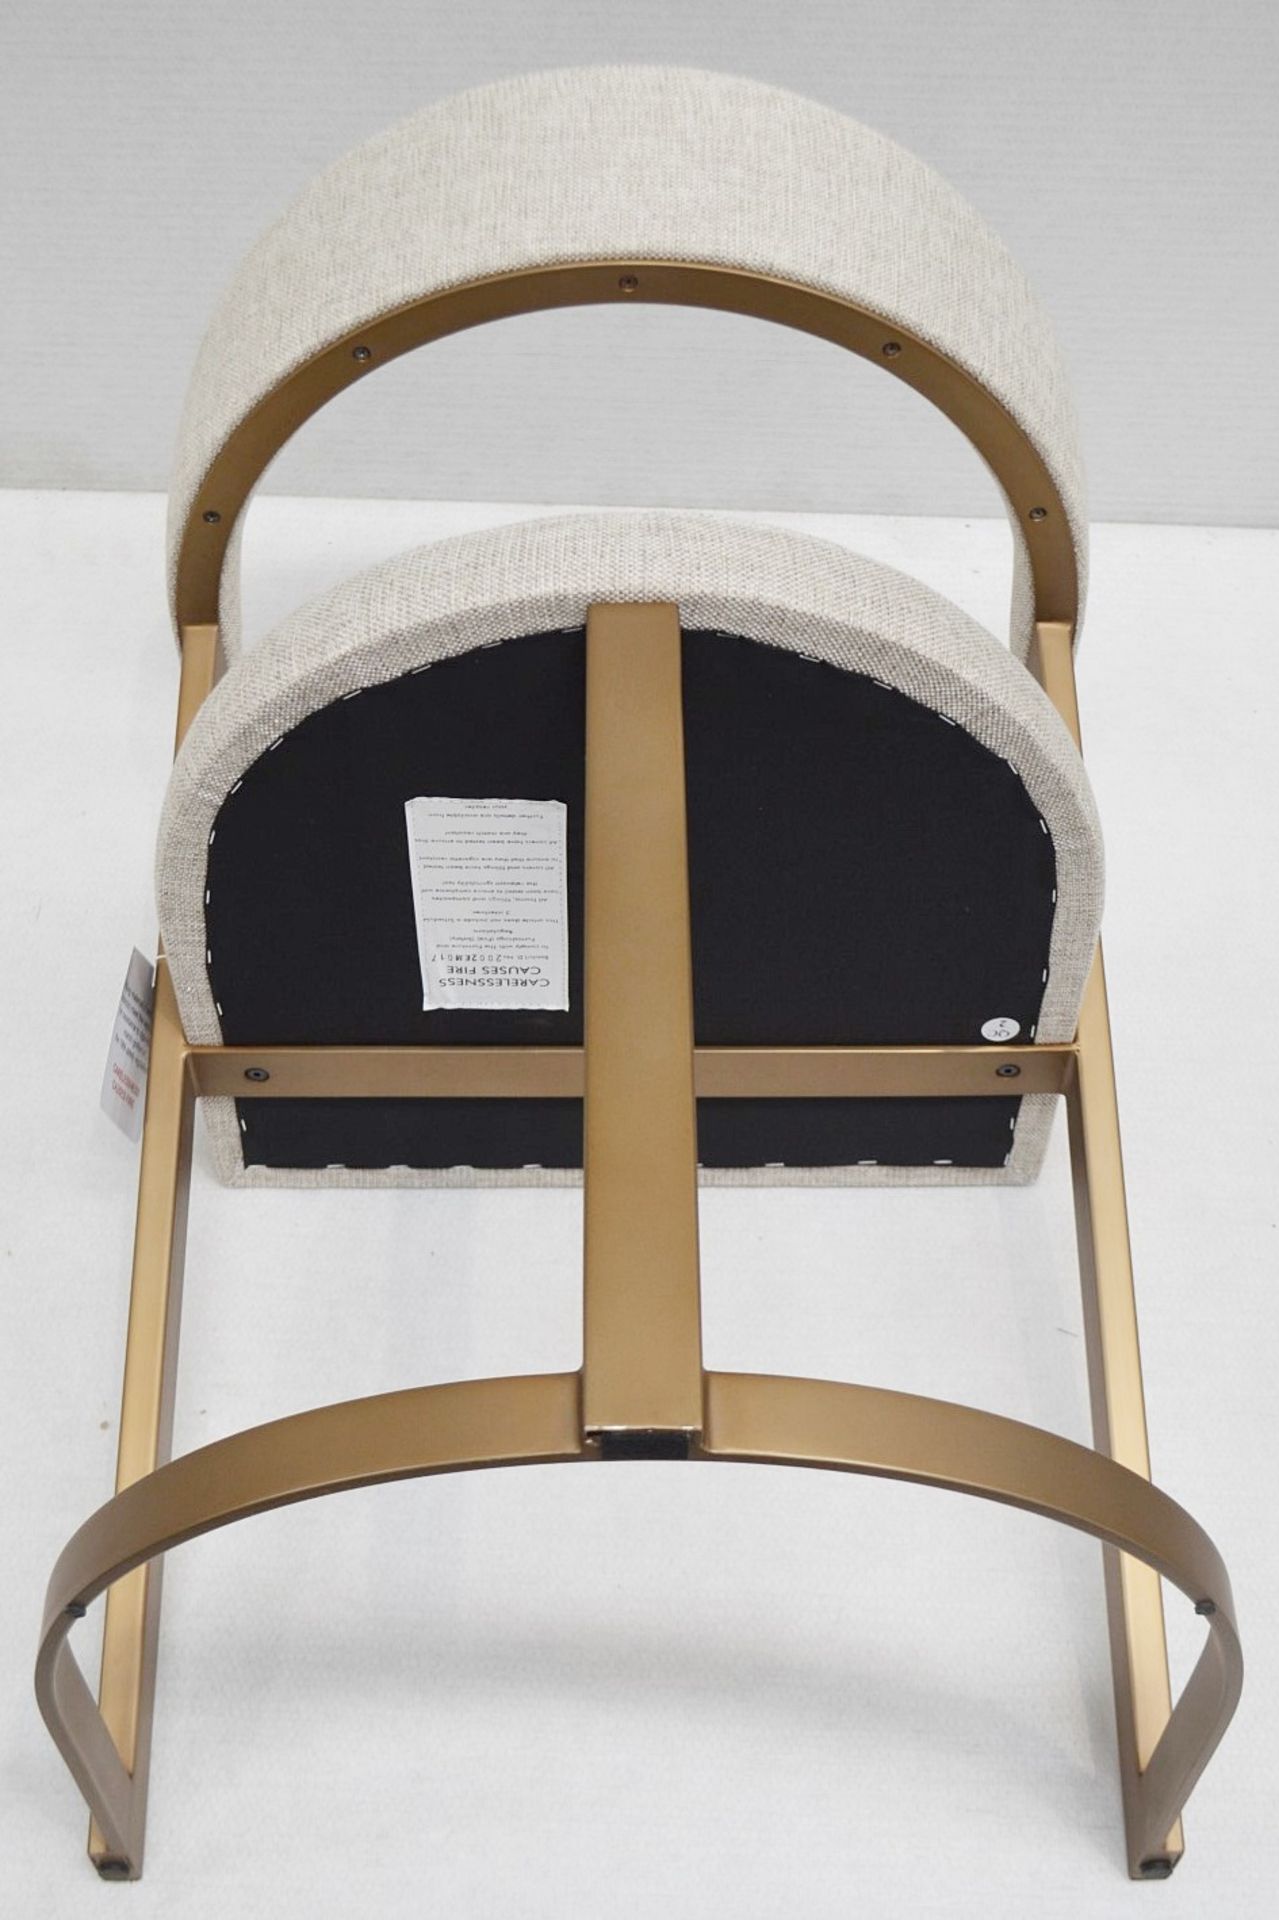 1 x EICHHOLTZ 'Dexter' Upholstered Brass Chair - In A Loki Natural Upholstery - Ref: 5836364/JUN21 - - Image 7 of 16